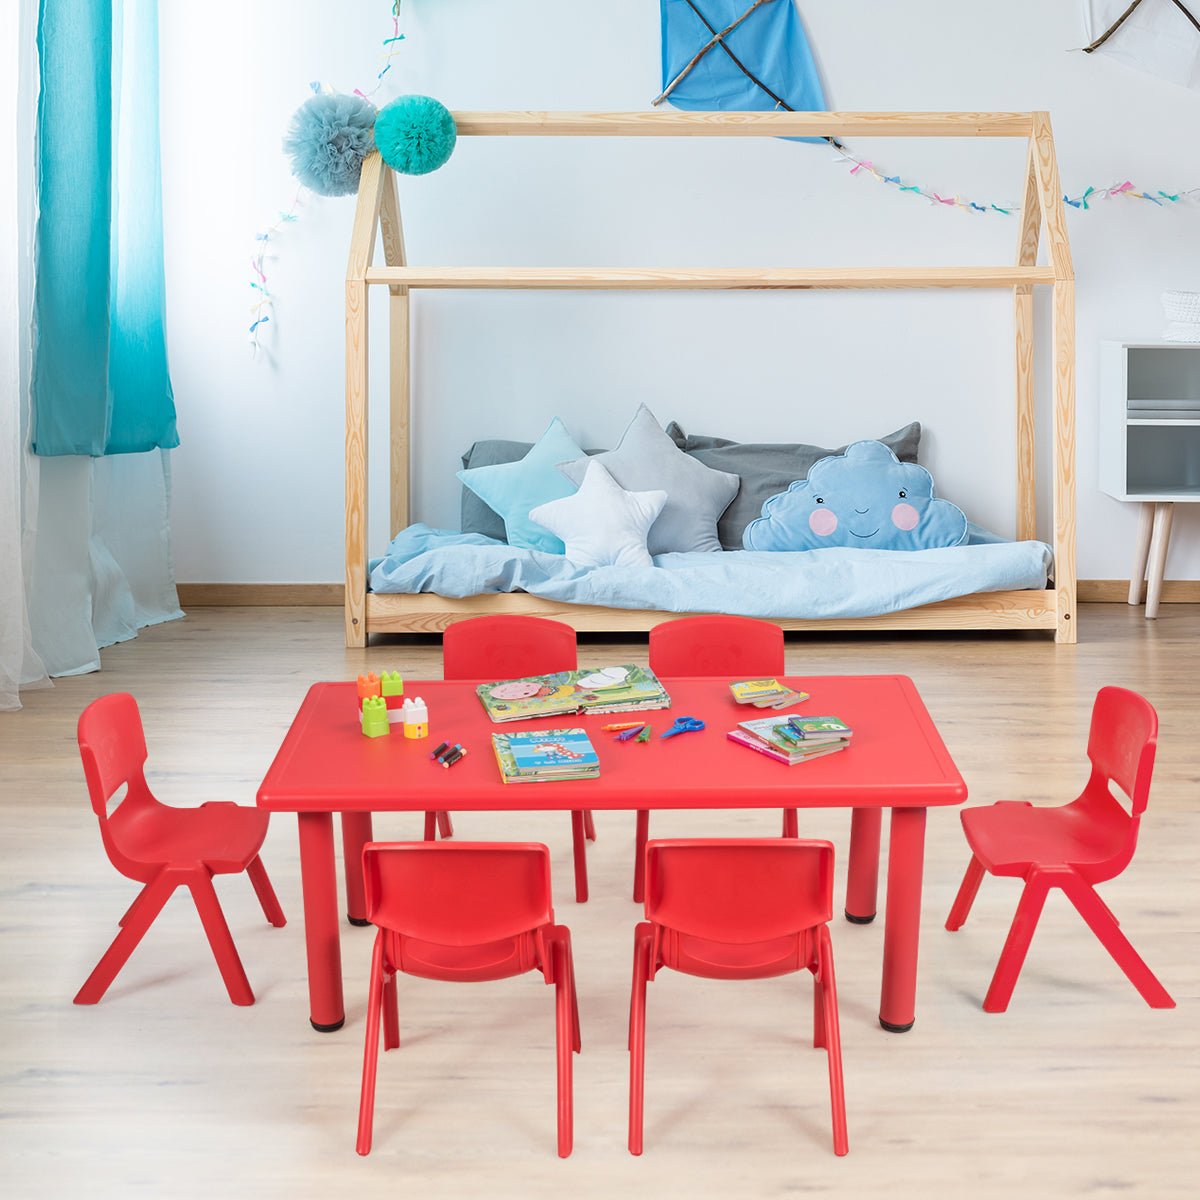 Child's Table and 6 Chairs Set - Versatile Spaces for Play and Study